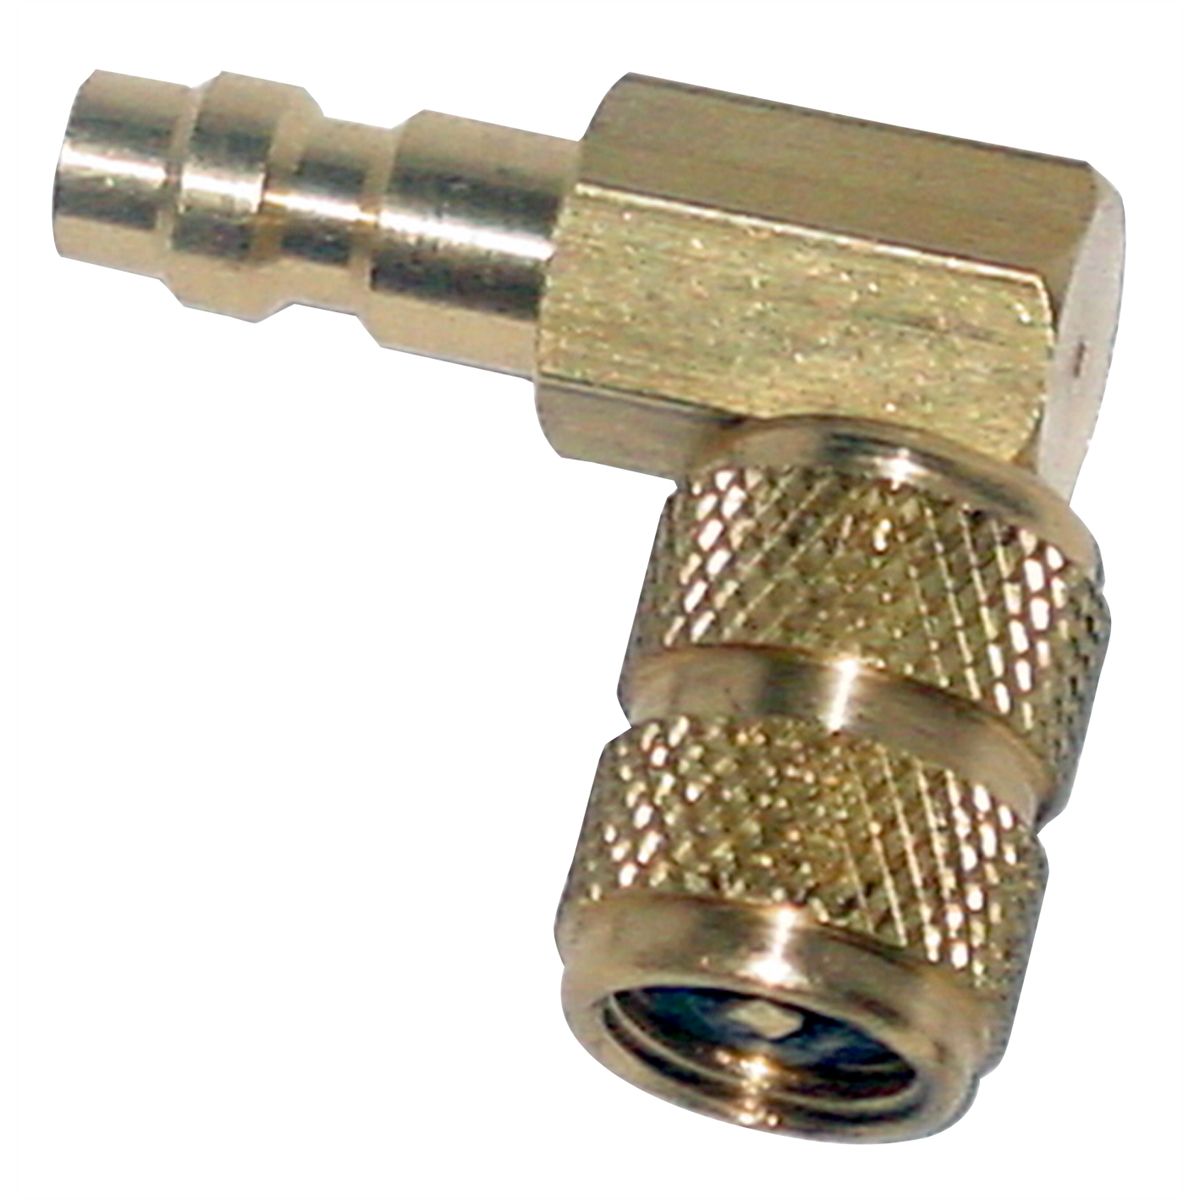 Schrader GM Right Angle Adapter